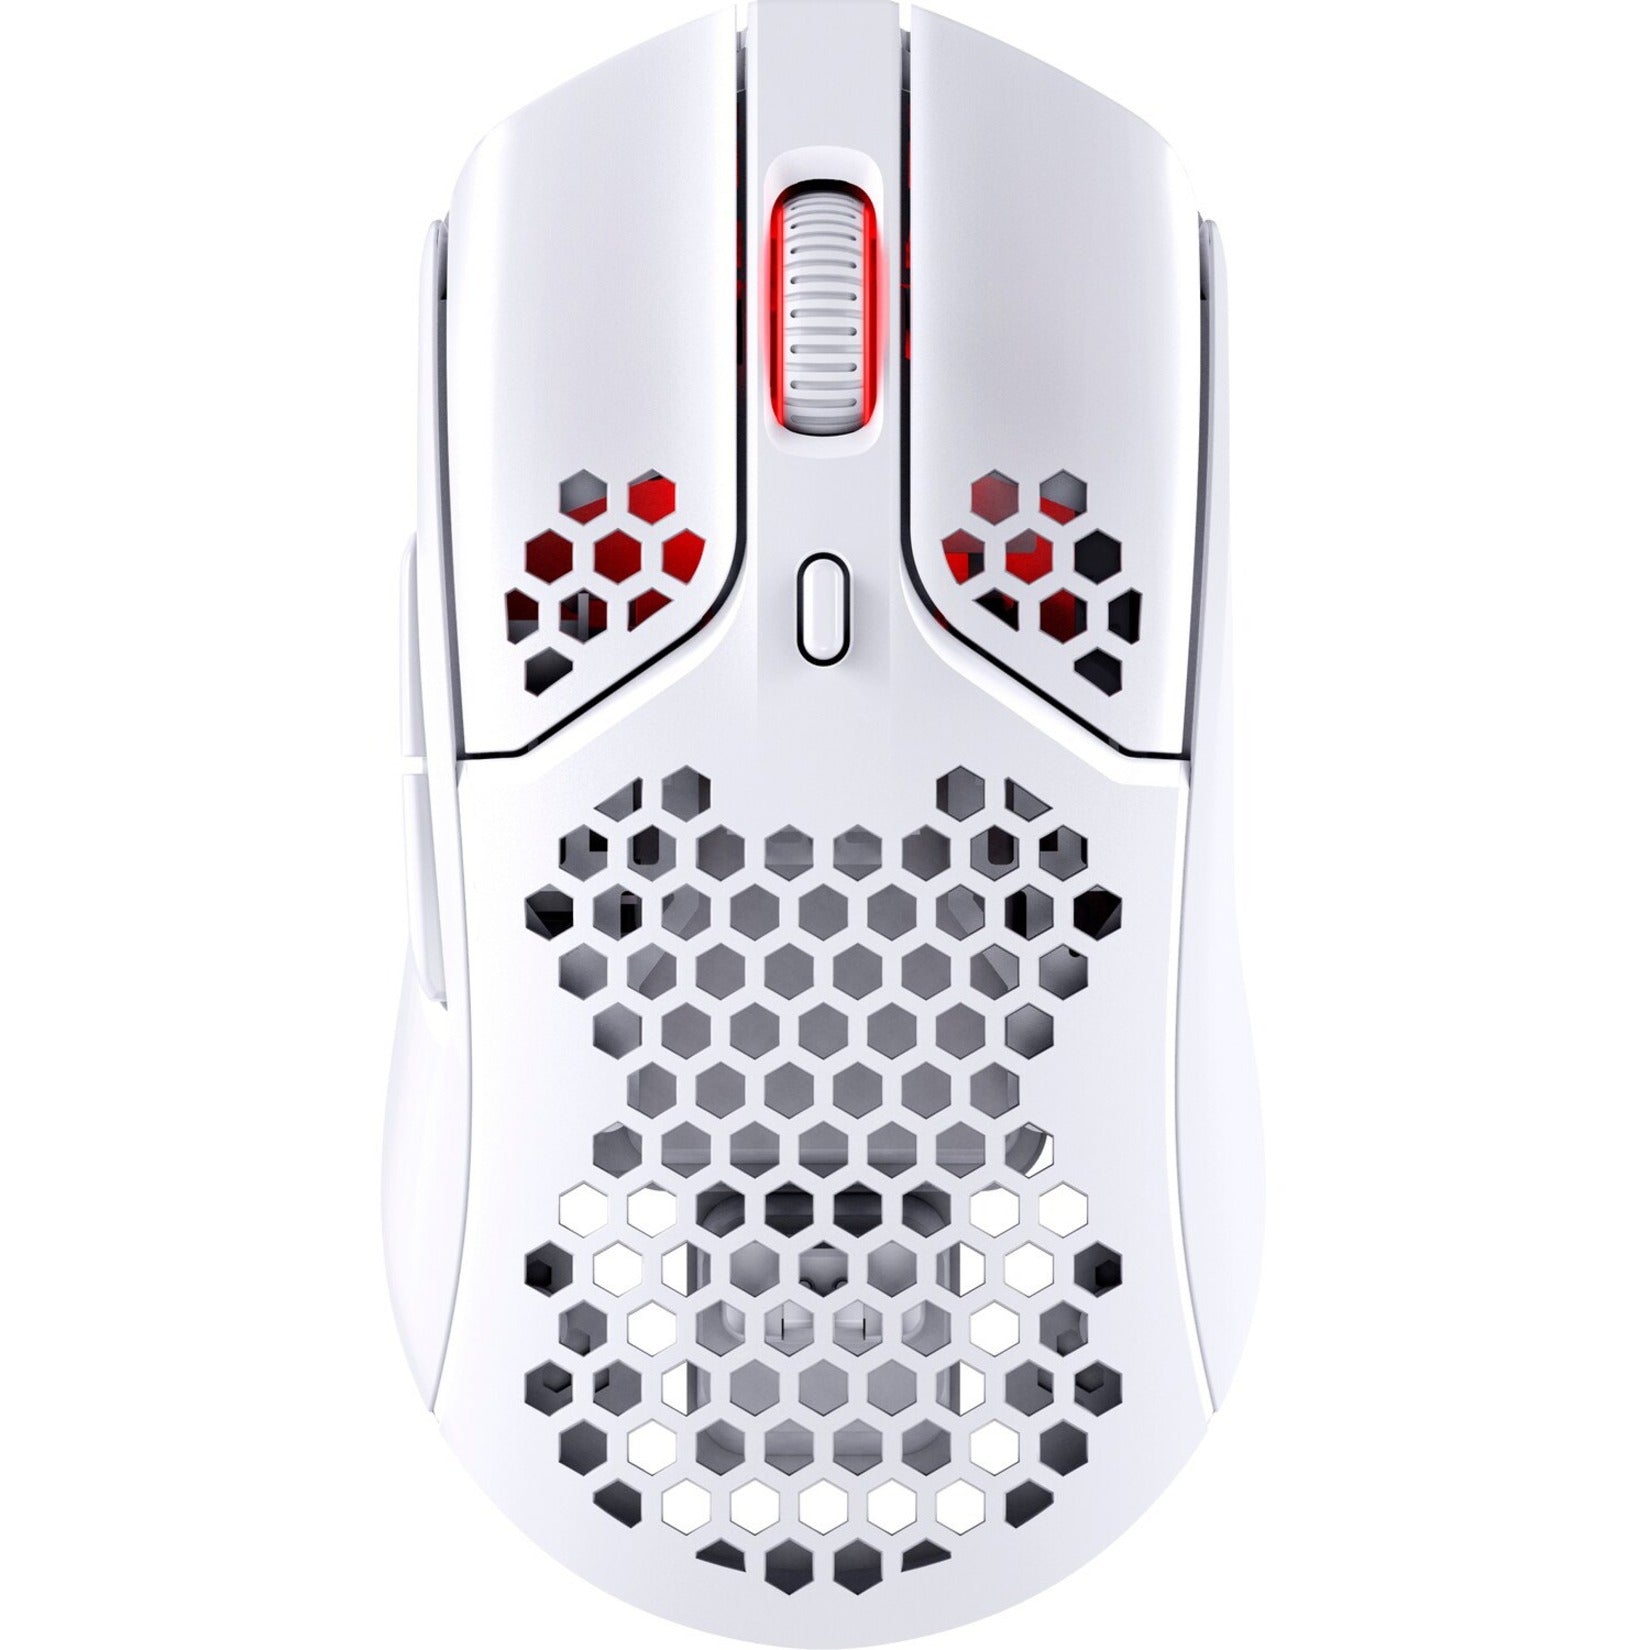 HyperX 4P5D8AA Pulsefire Haste Gaming Mouse, Symmetrical Design, 16000 DPI, Wireless/Cable Connectivity